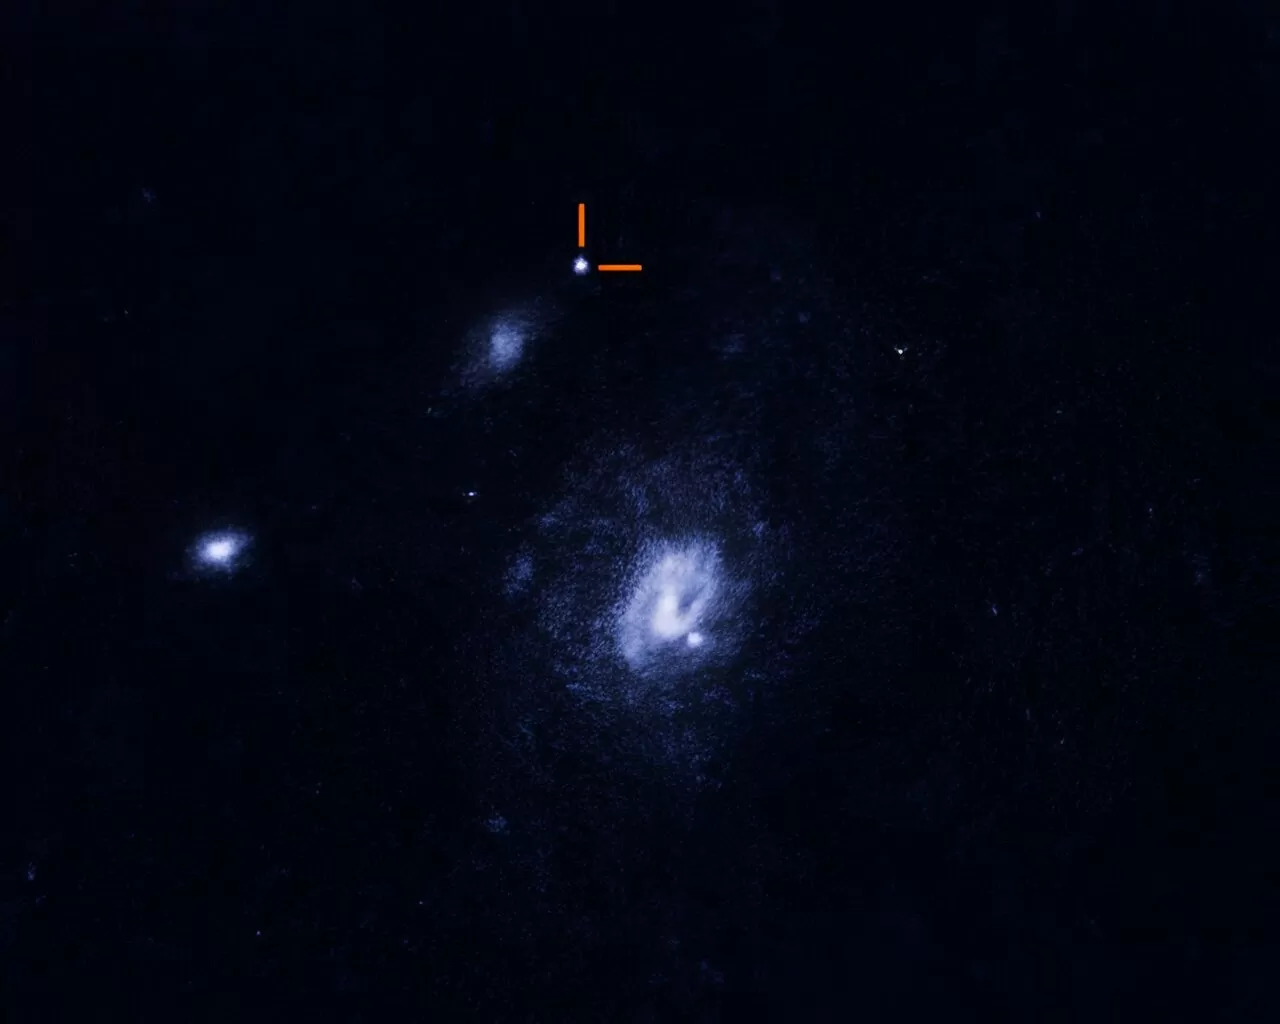 This captivating Hubble snapshot unveils a trio of galaxies, nestled amidst the serene black canvas of the cosmos. Dominating the frame is a grand spiral galaxy, adorned in hues of white and blue, stationed at the heart of the image. To its left, two smaller celestial islands of whitish hue make their presence known. Yet, it's the peculiar white fleck near the image's summit, underscored by a pair of intersecting orange lines, that steals the spotlight. This glow emanates from a mystifying exploded entity, unrelated to any of the galaxies in view, a cosmic enigma awaiting unravelling. | Credit: NASA, ESA, STScI, A. Chrimes (Radboud University)